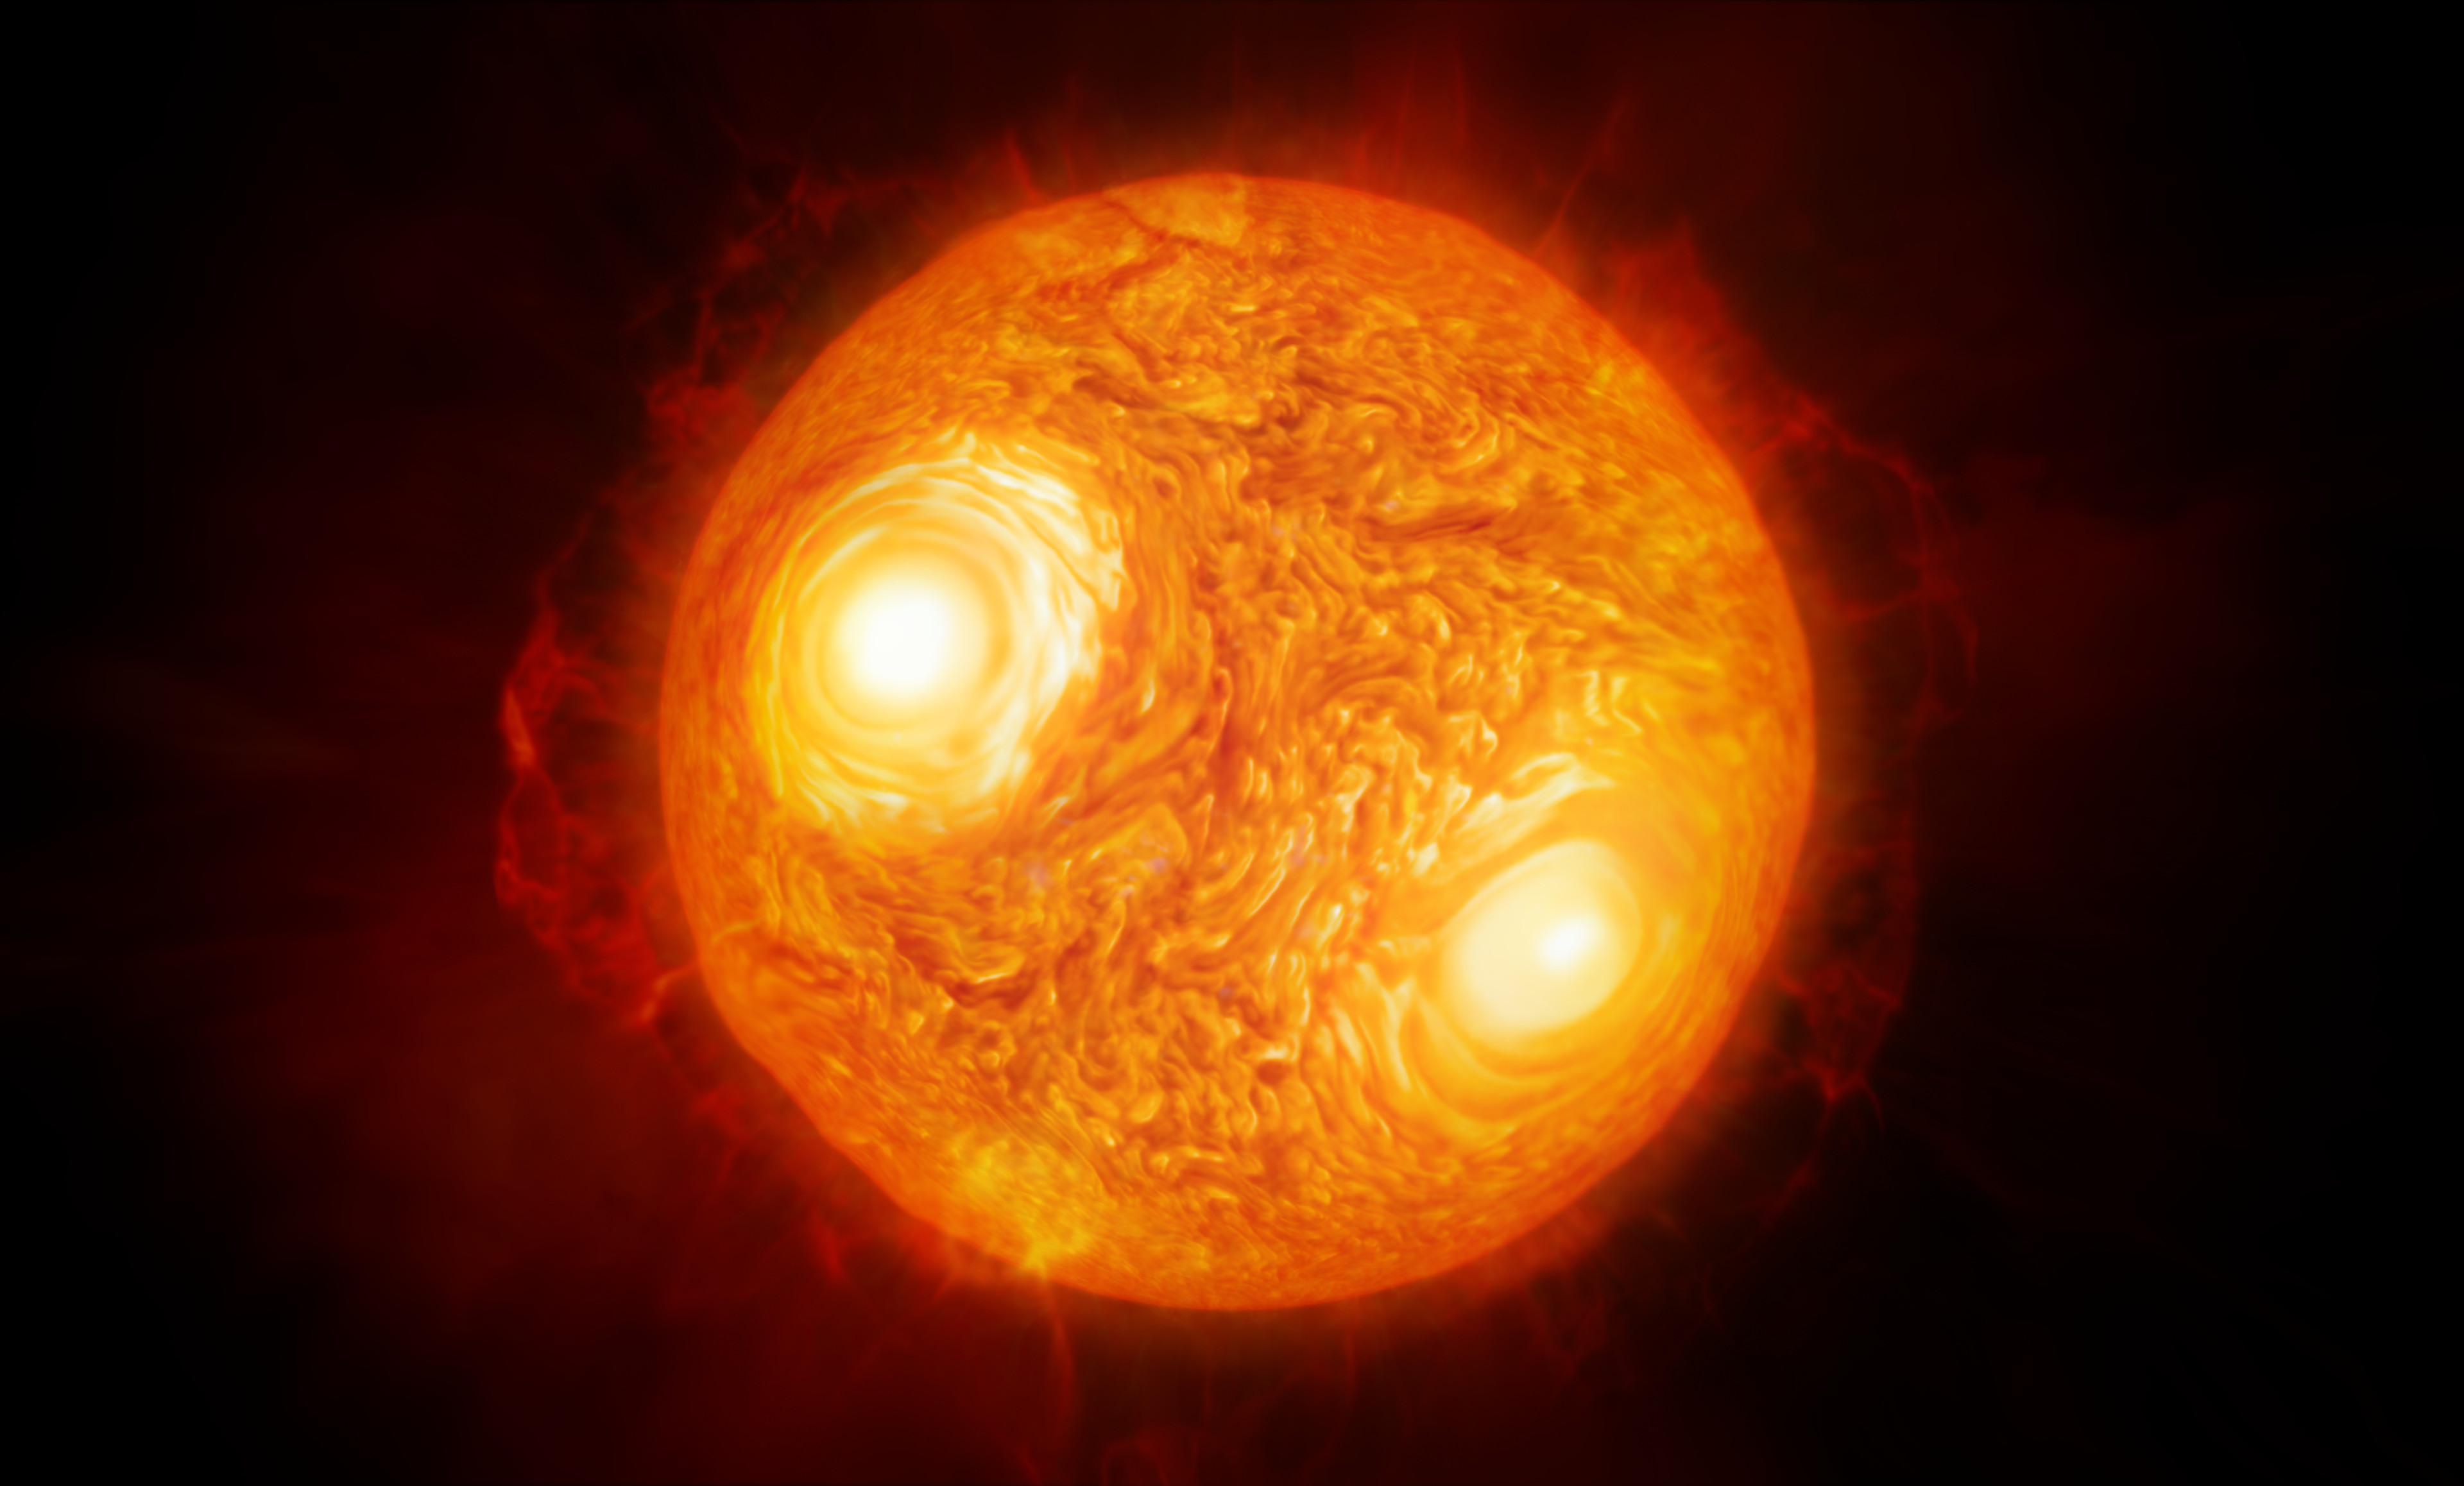 Artist's impression of the red supergiant star Antares